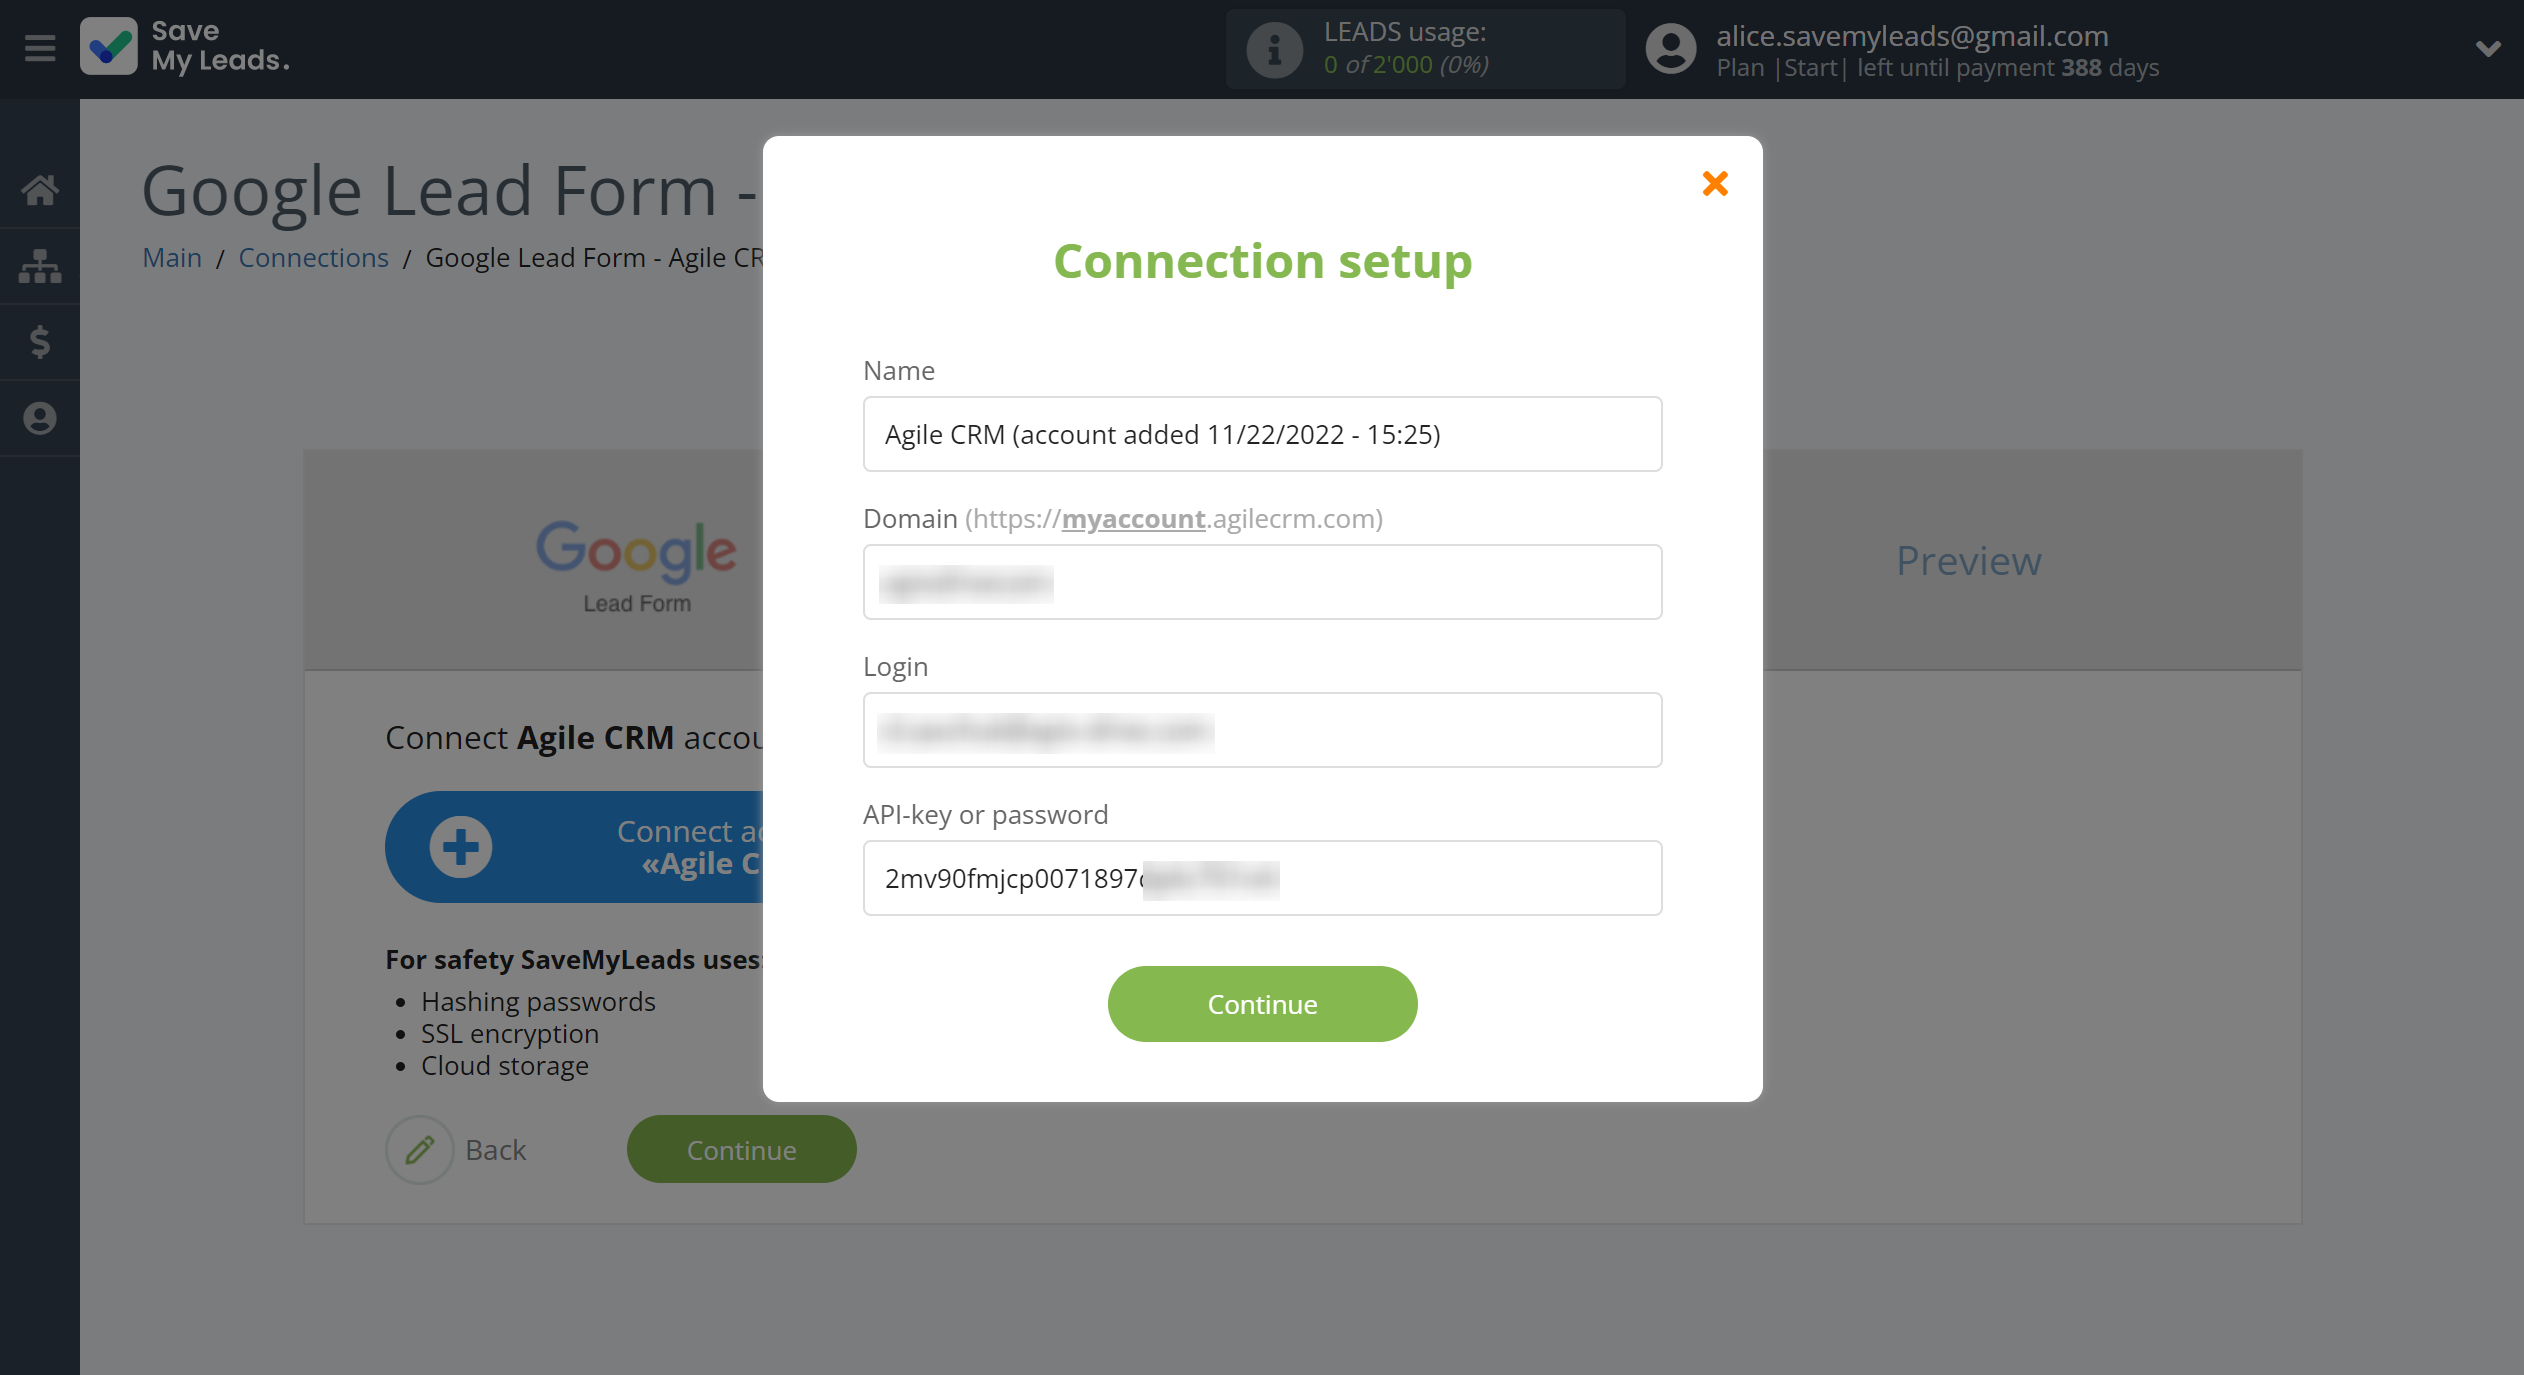 How to Connect Google Lead Form with AgileCRM Create Deal | Data Destination account connection